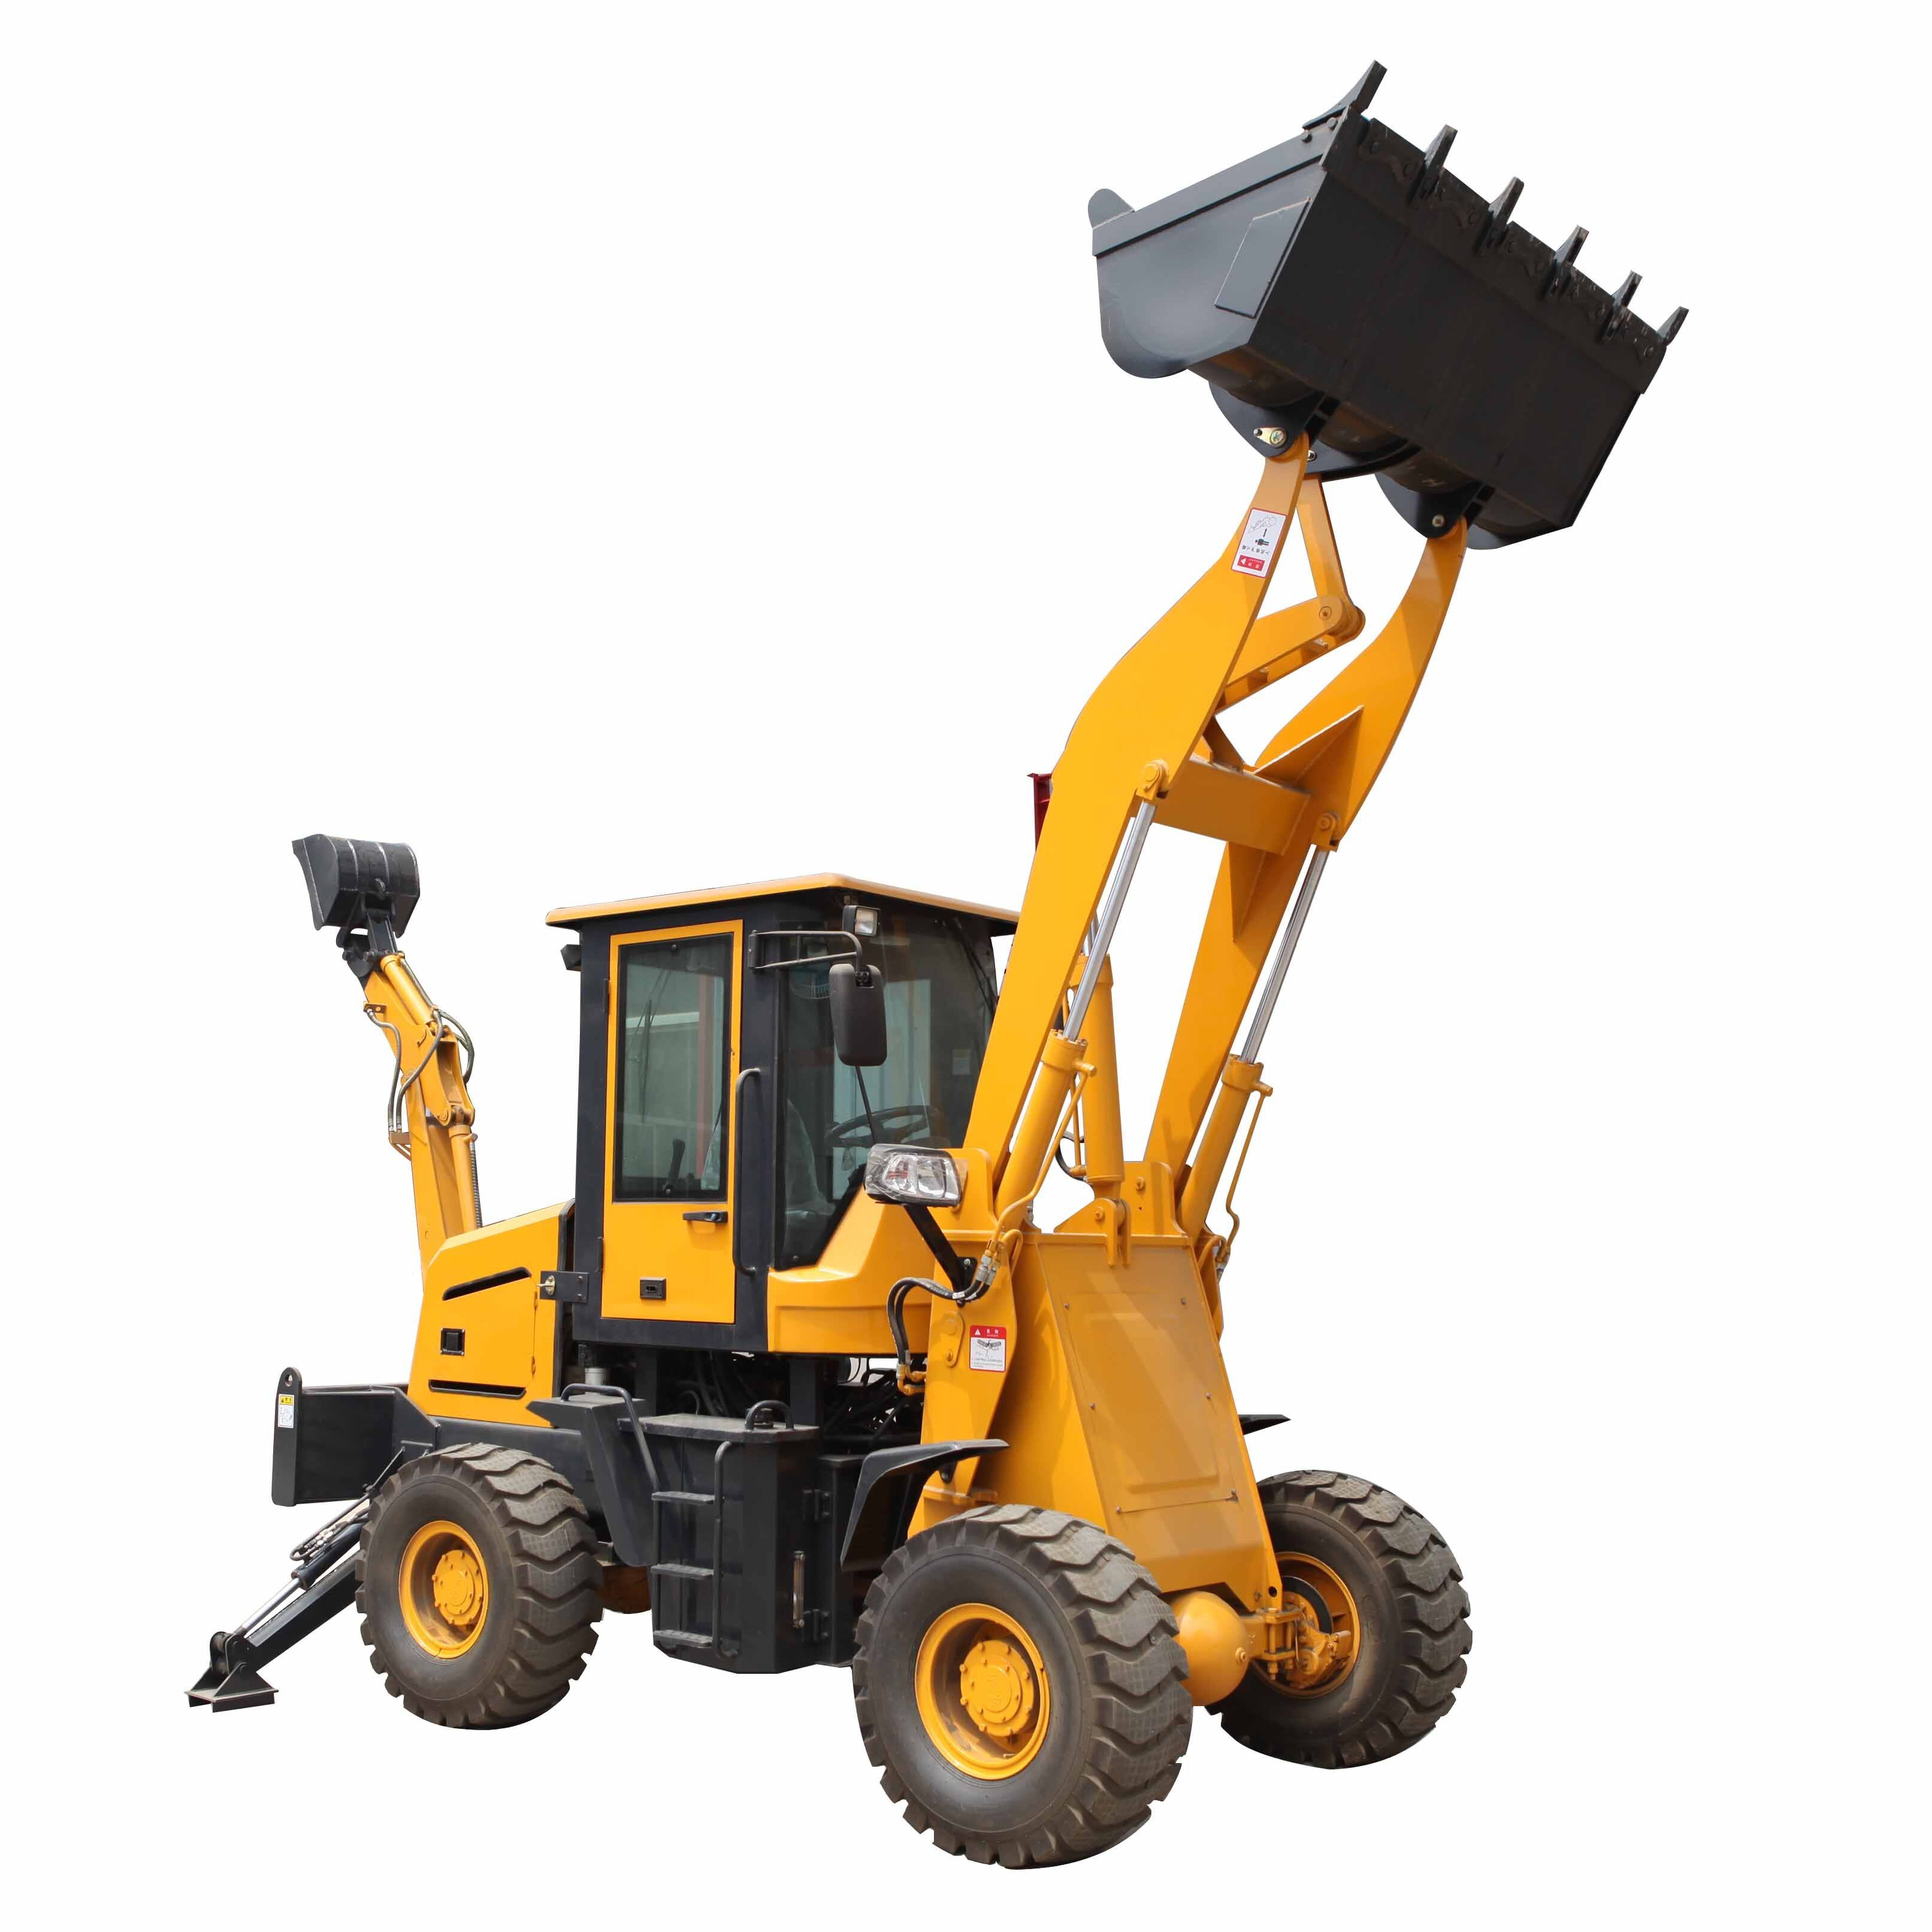 New Backhoe Professional Manufacturer 4WD Backhoe Excavator with Attachments for Tractors